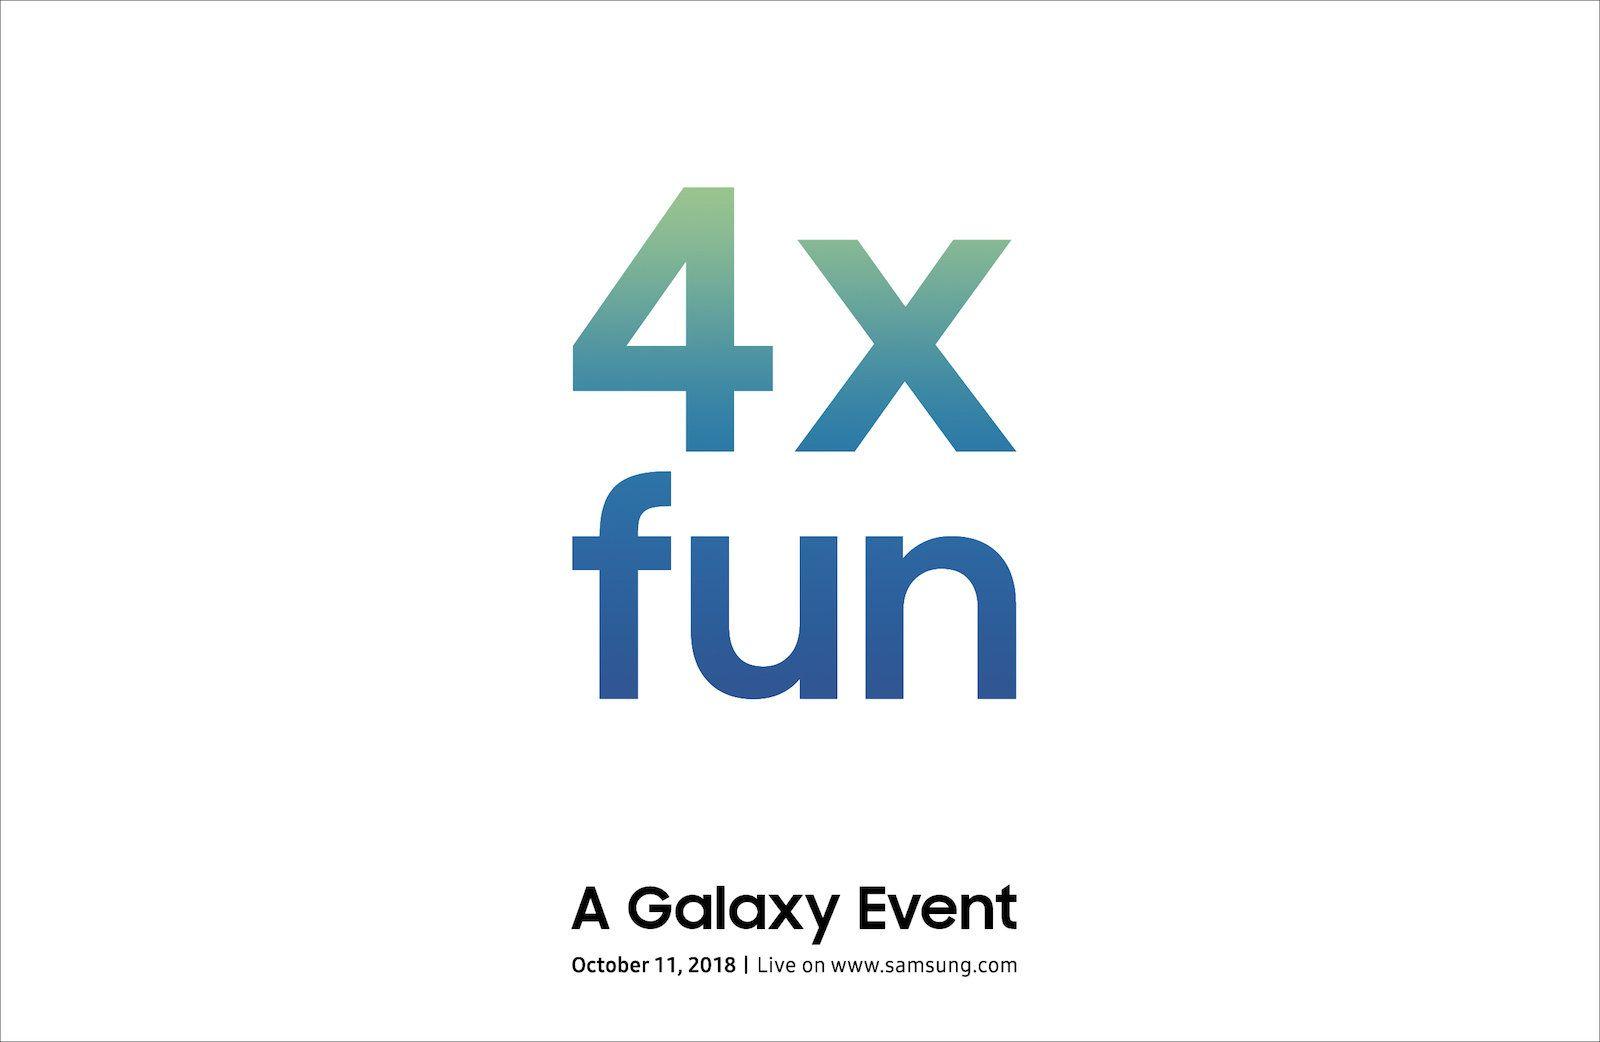 Samsung 2018 Logo - Samsung teases October 11th Galaxy event with '4x fun'